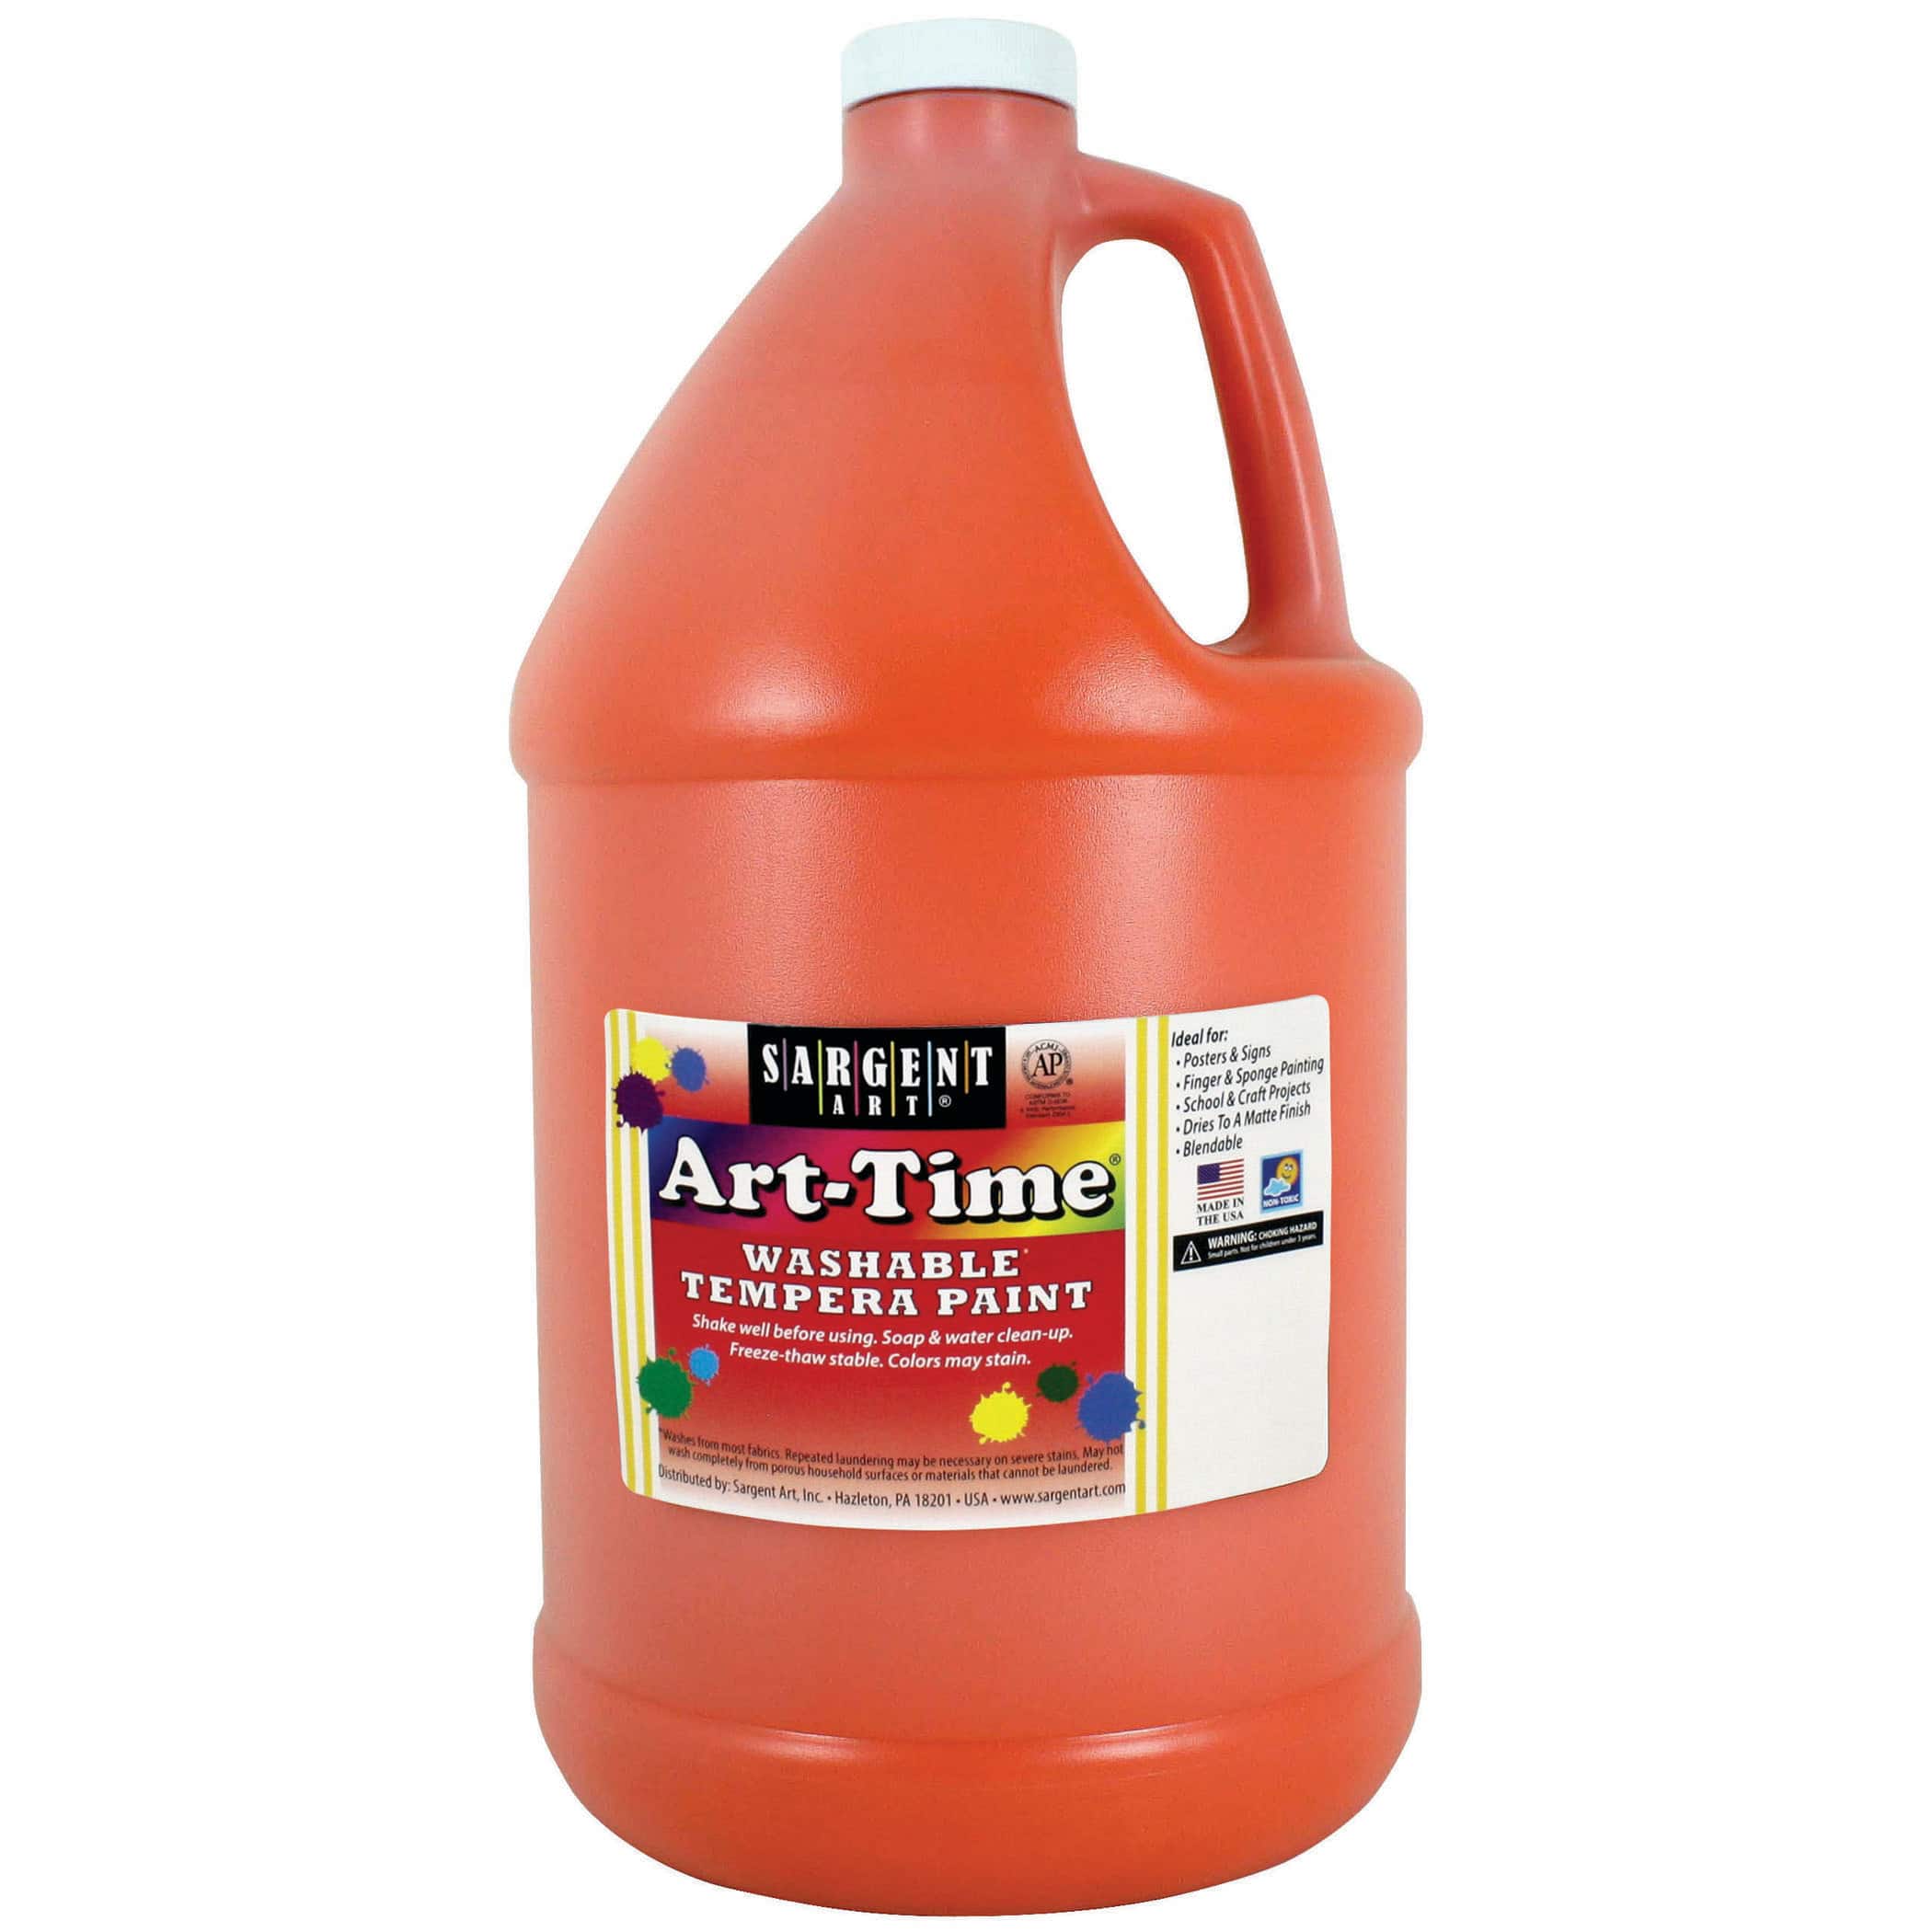 Washable Tempera Paint, One Gallon Jugs, Pastel Colors, Made in